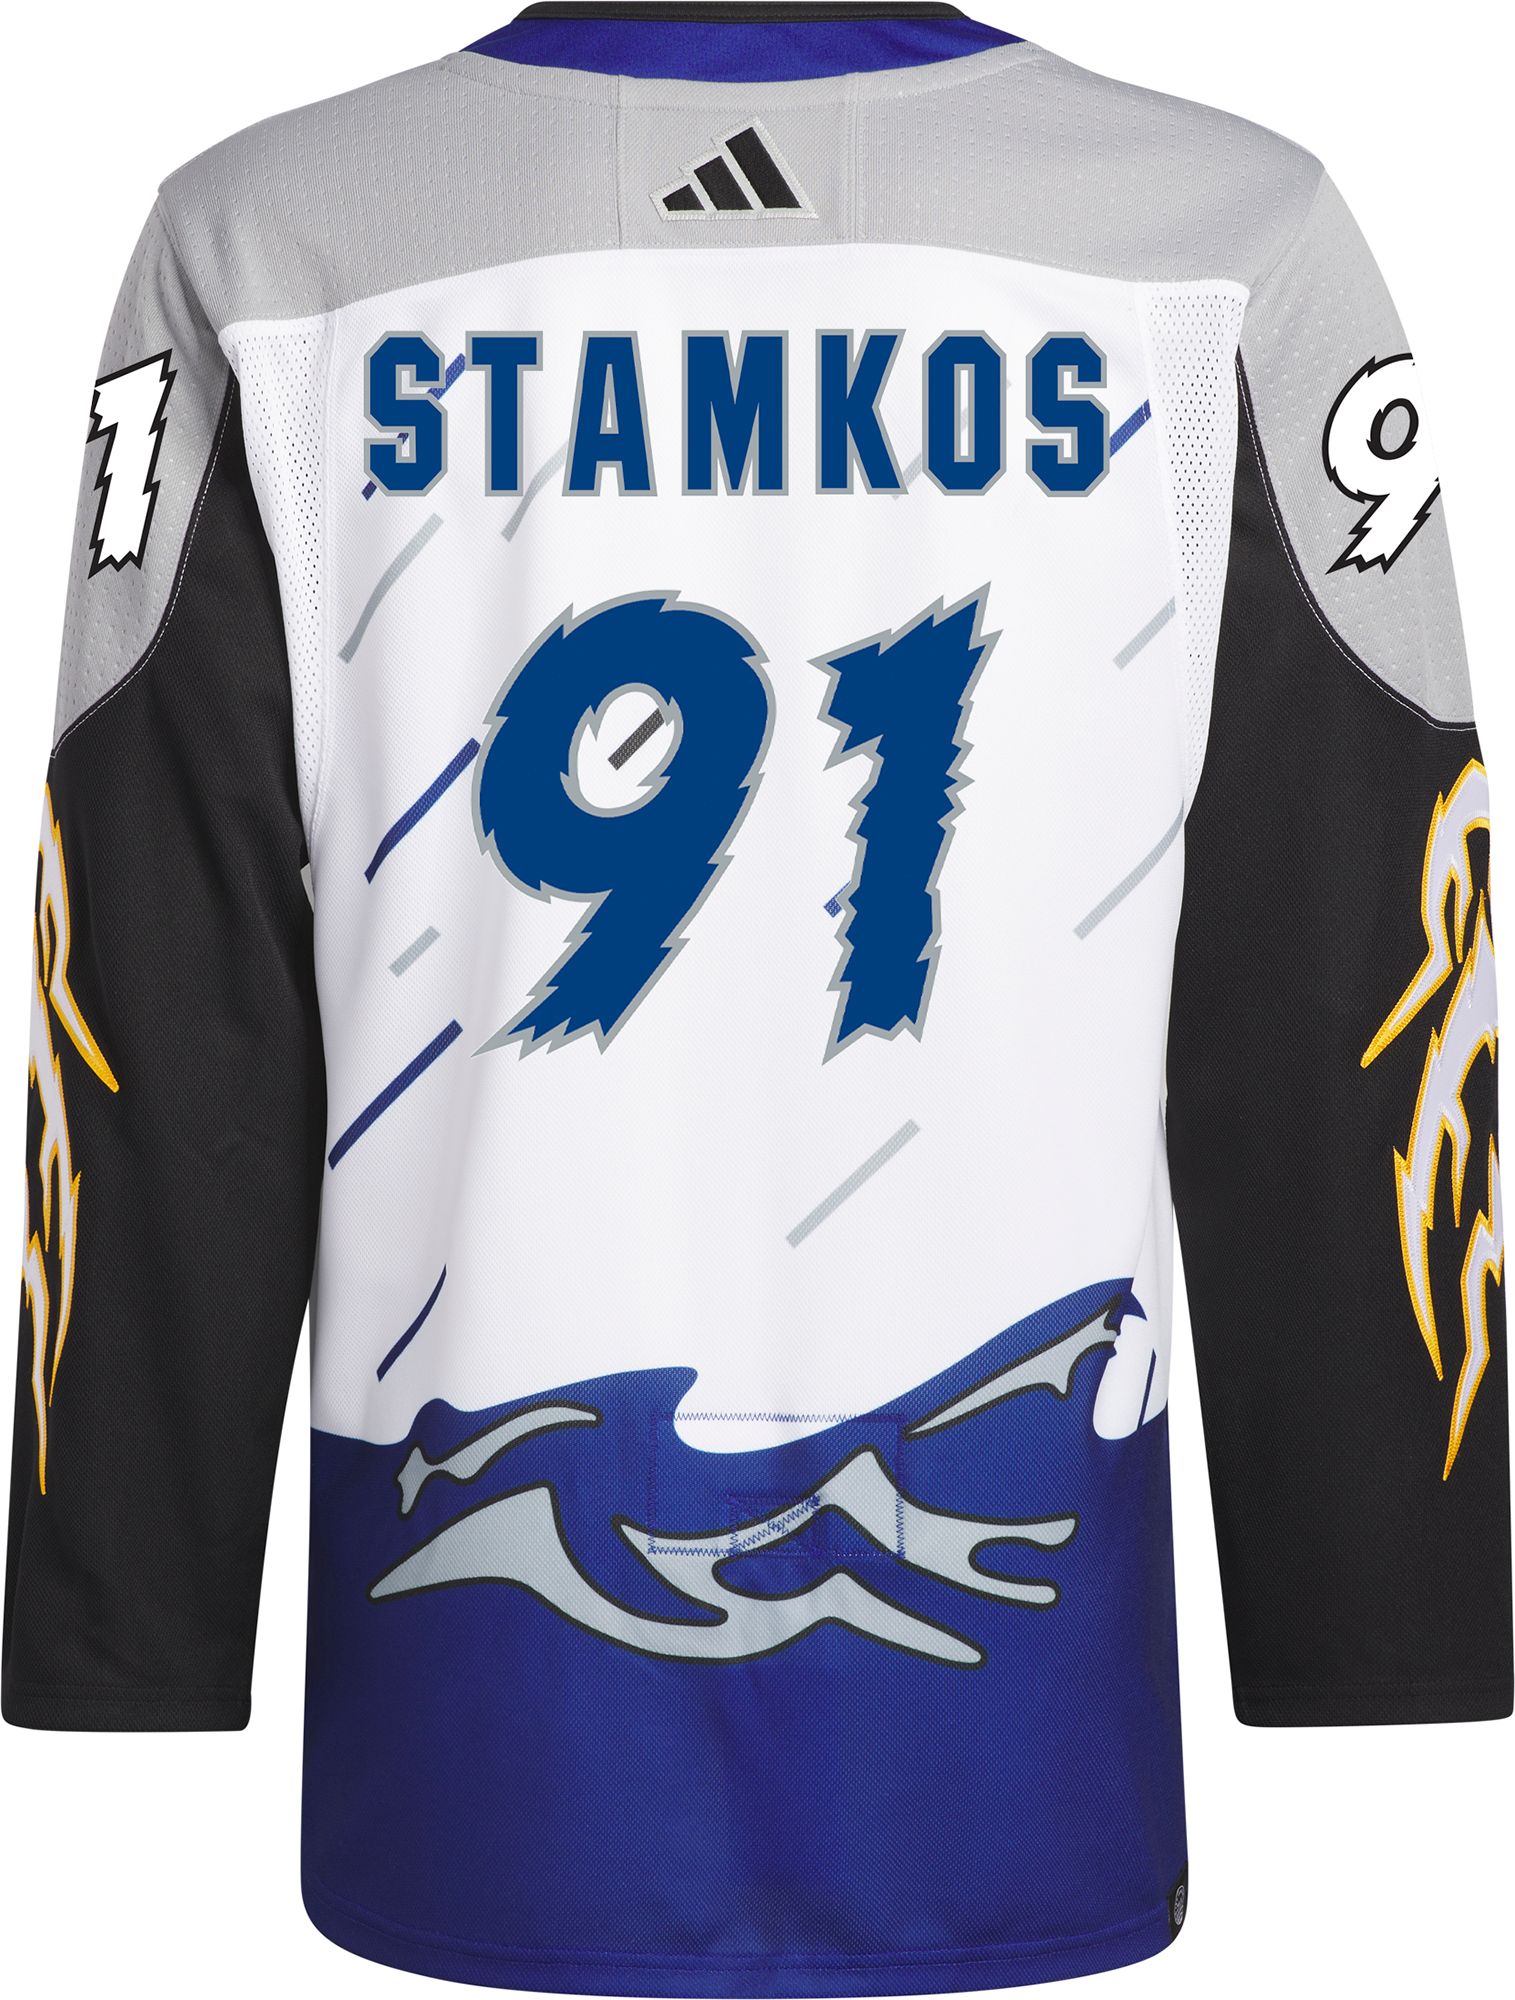 tampa bay nfl jersey 2022